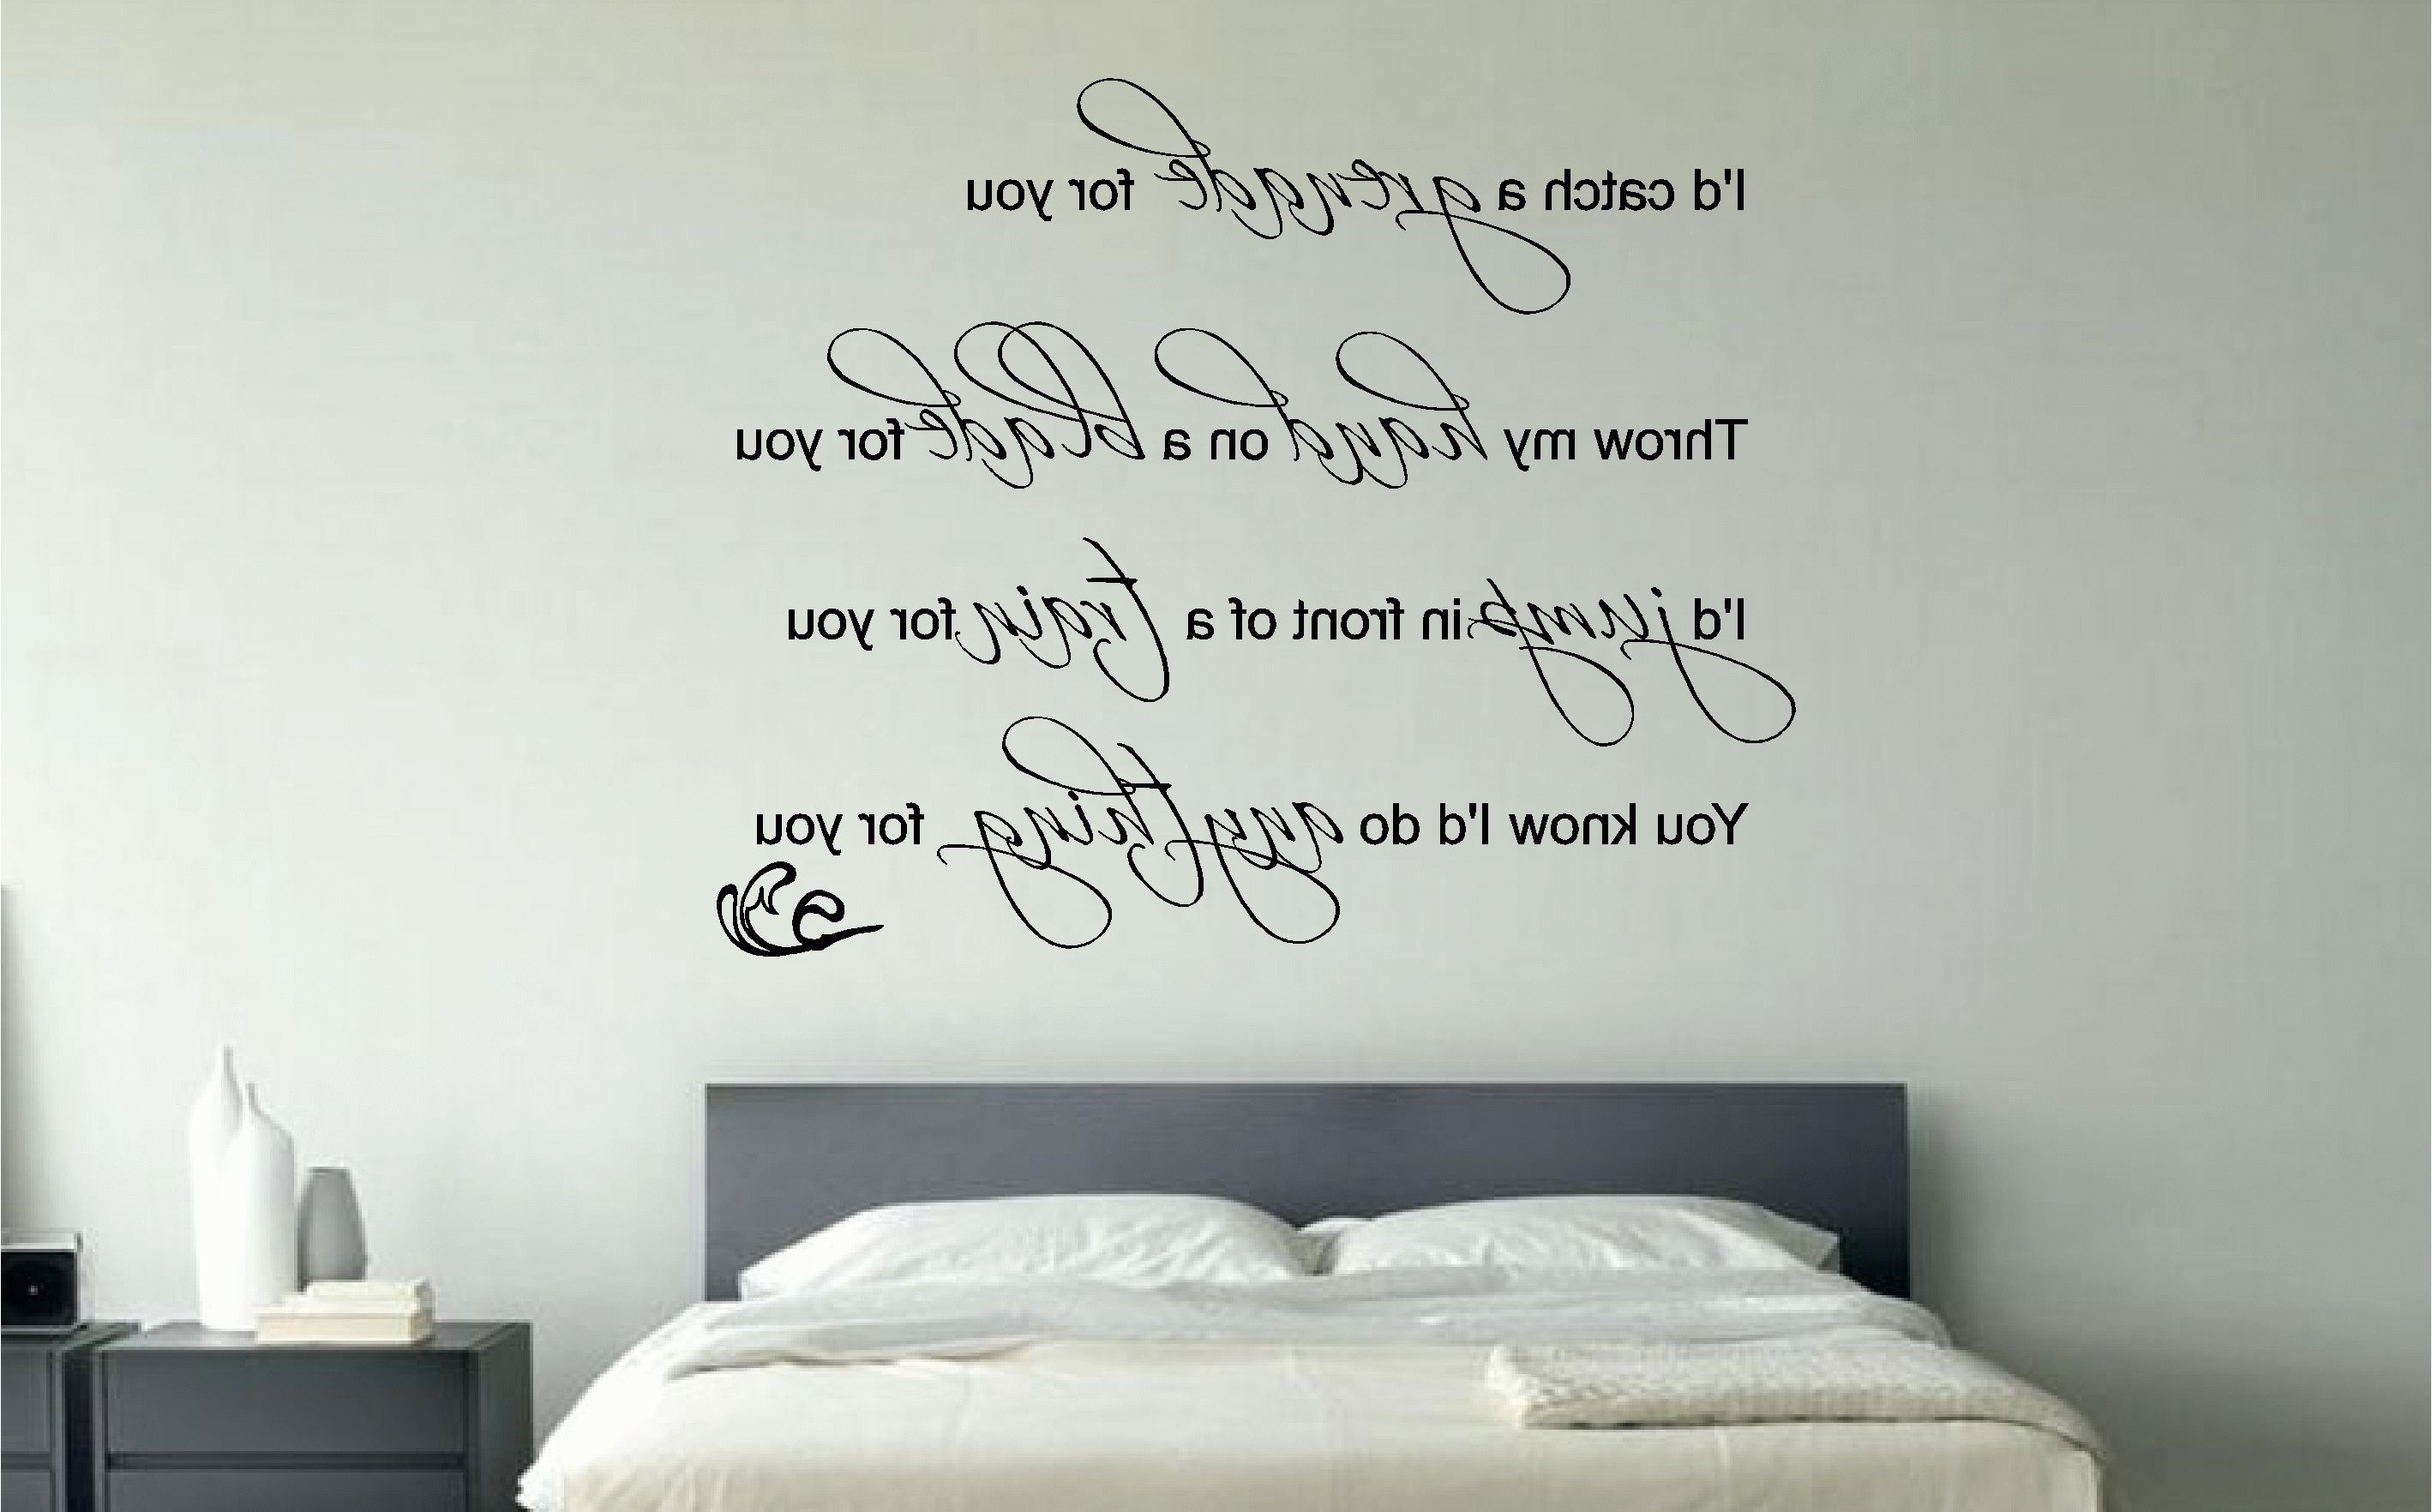 2018 Bruno Mars Grenade Lyrics Music Wall Art Sticker Decal Bedroom Intended For Wall Art Decals (View 15 of 15)